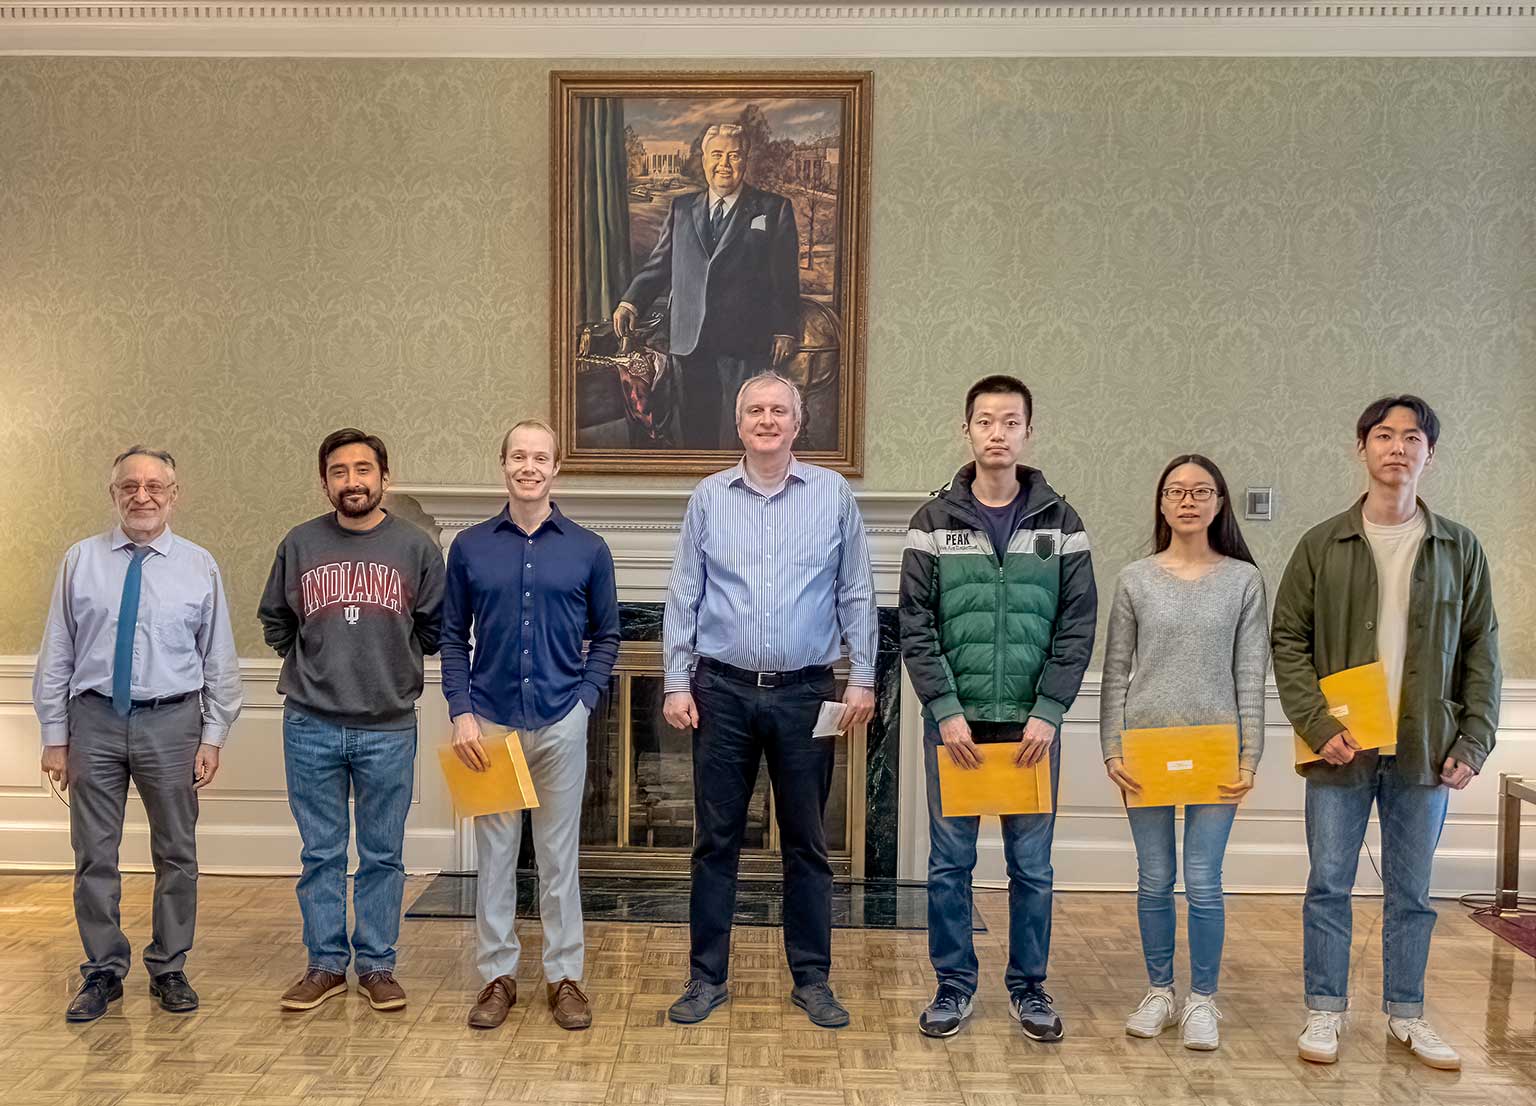 A group of graduate economics students pose in the Indiana Memorial Union, with a portrait of Herman B Wells above them.